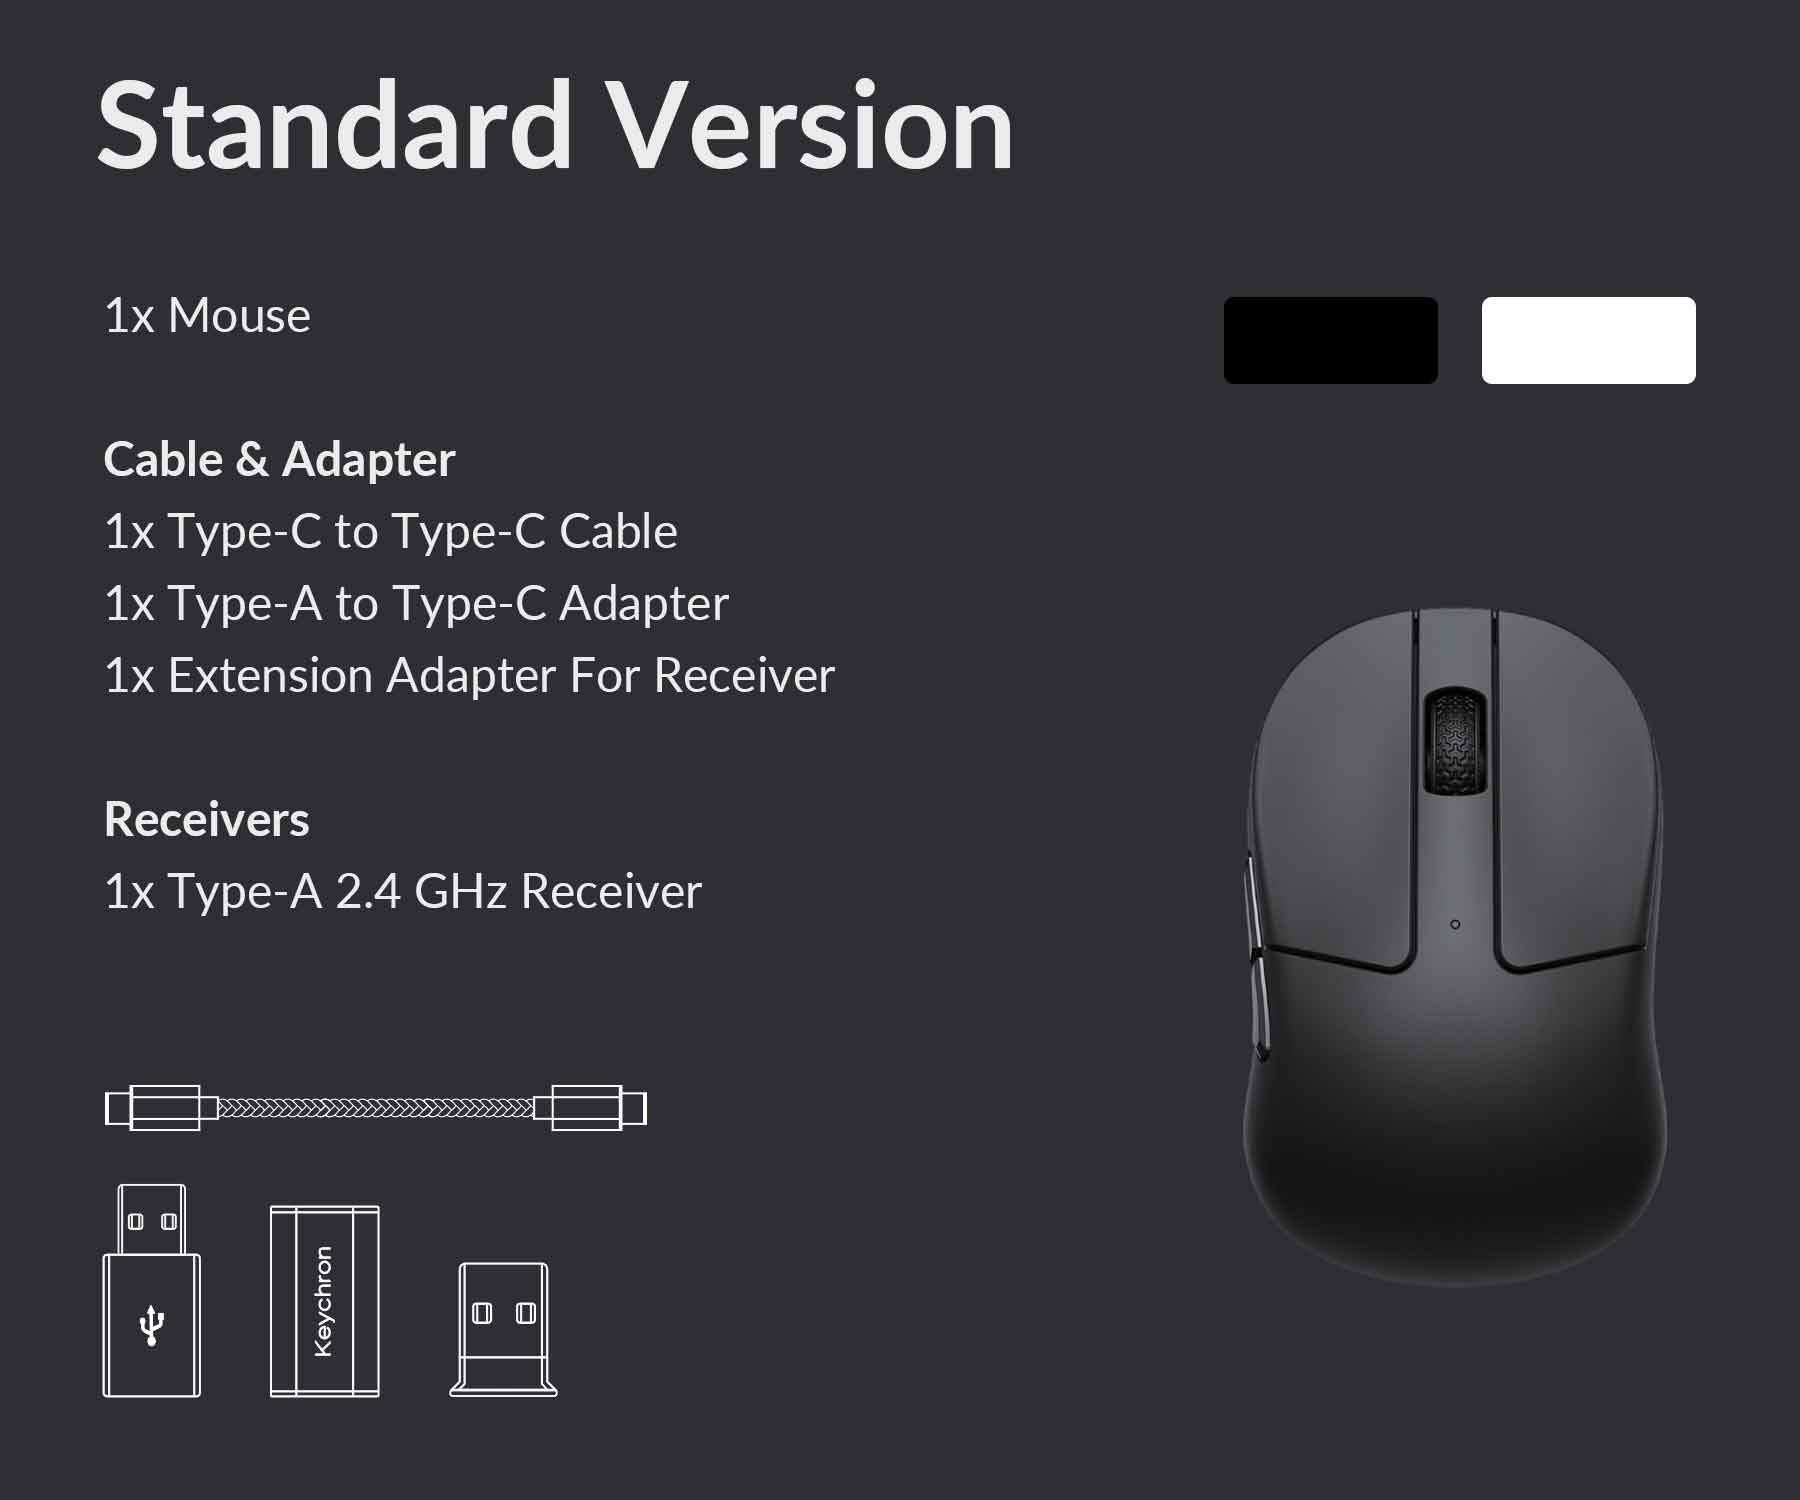 package-list-of-the-keychron-m4-wireless-mouse-standard-version__PID:5784fa0f-80eb-457e-93d4-ccc8eafb31a9